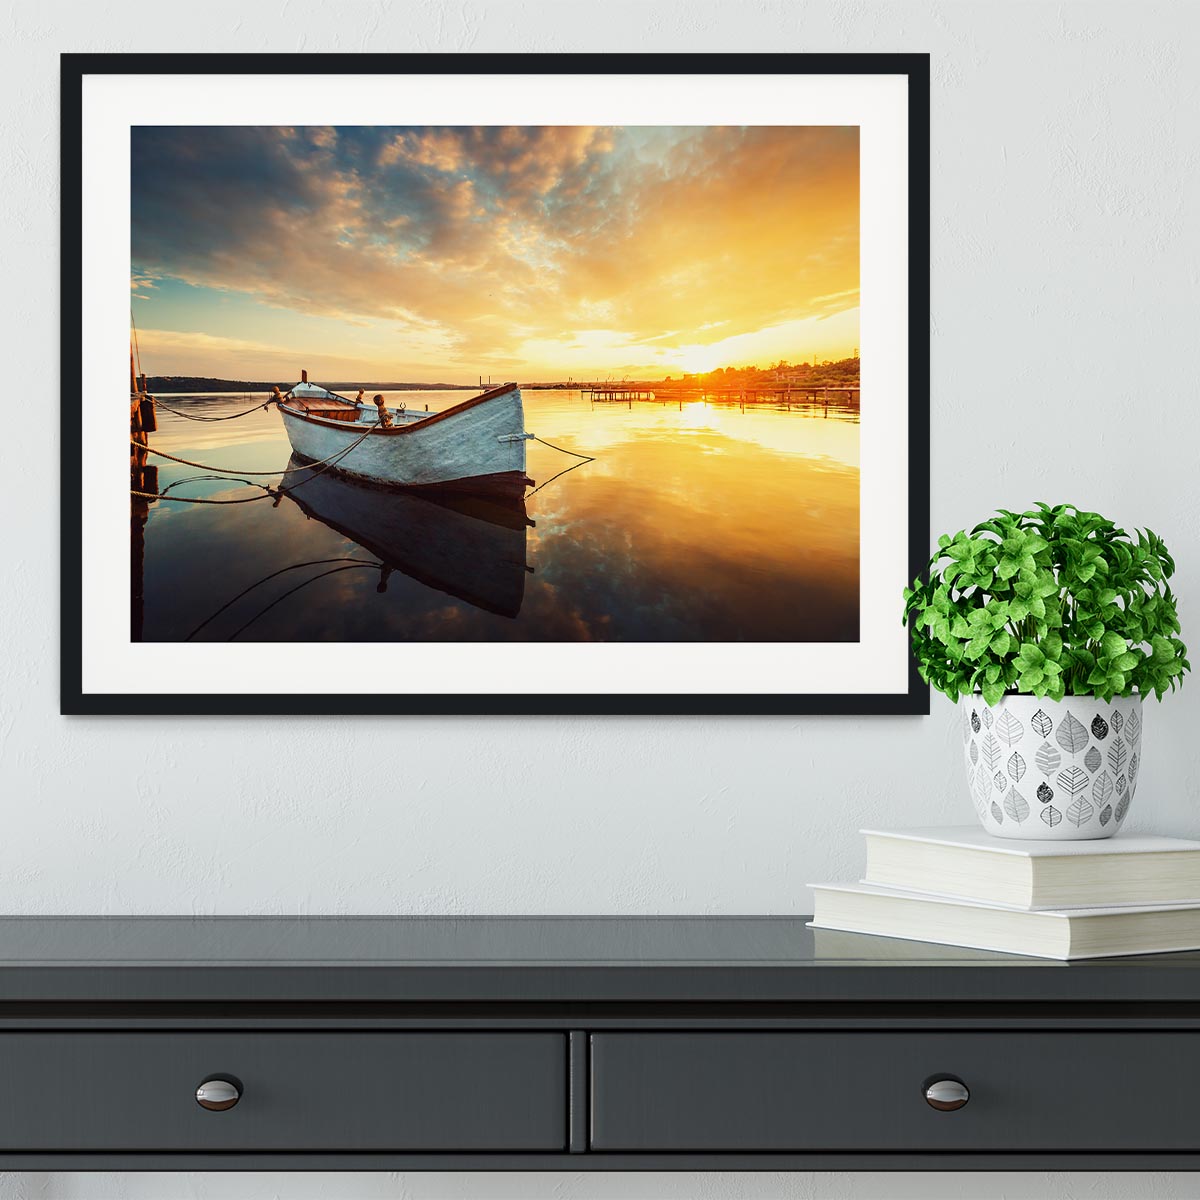 Boat on lake with a reflection Framed Print - Canvas Art Rocks - 1